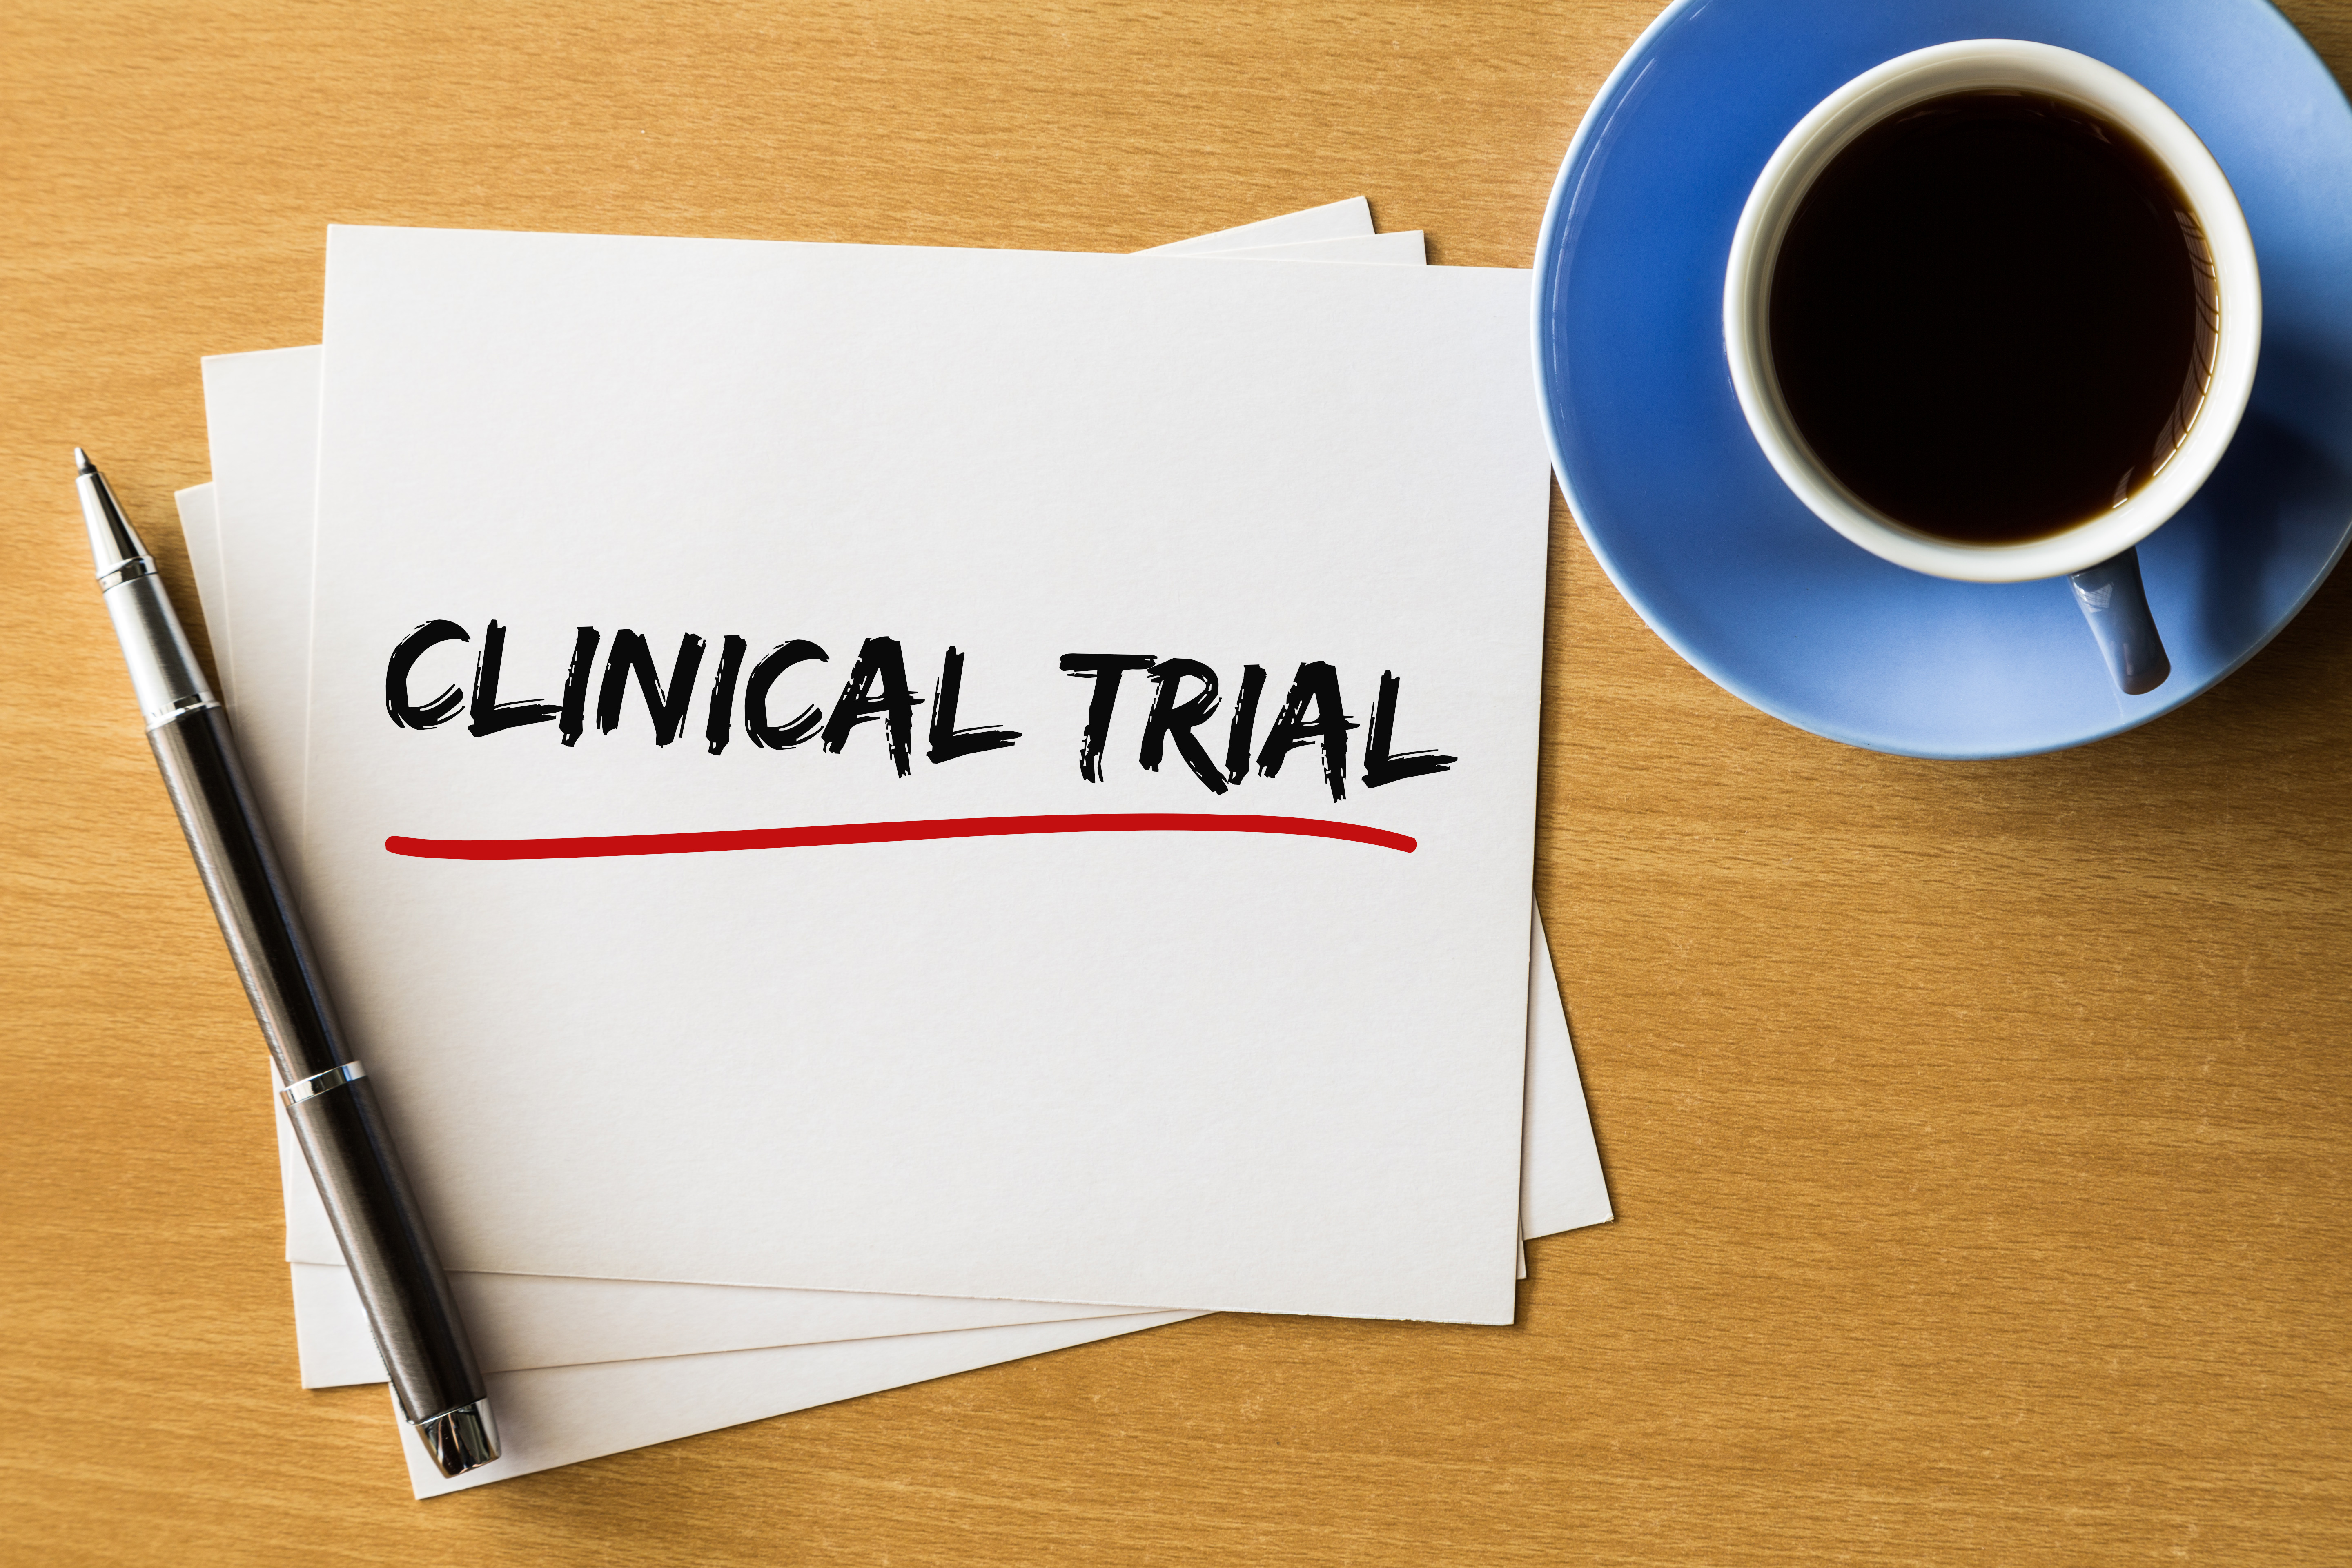 Finding a Cancer Clinical Trial